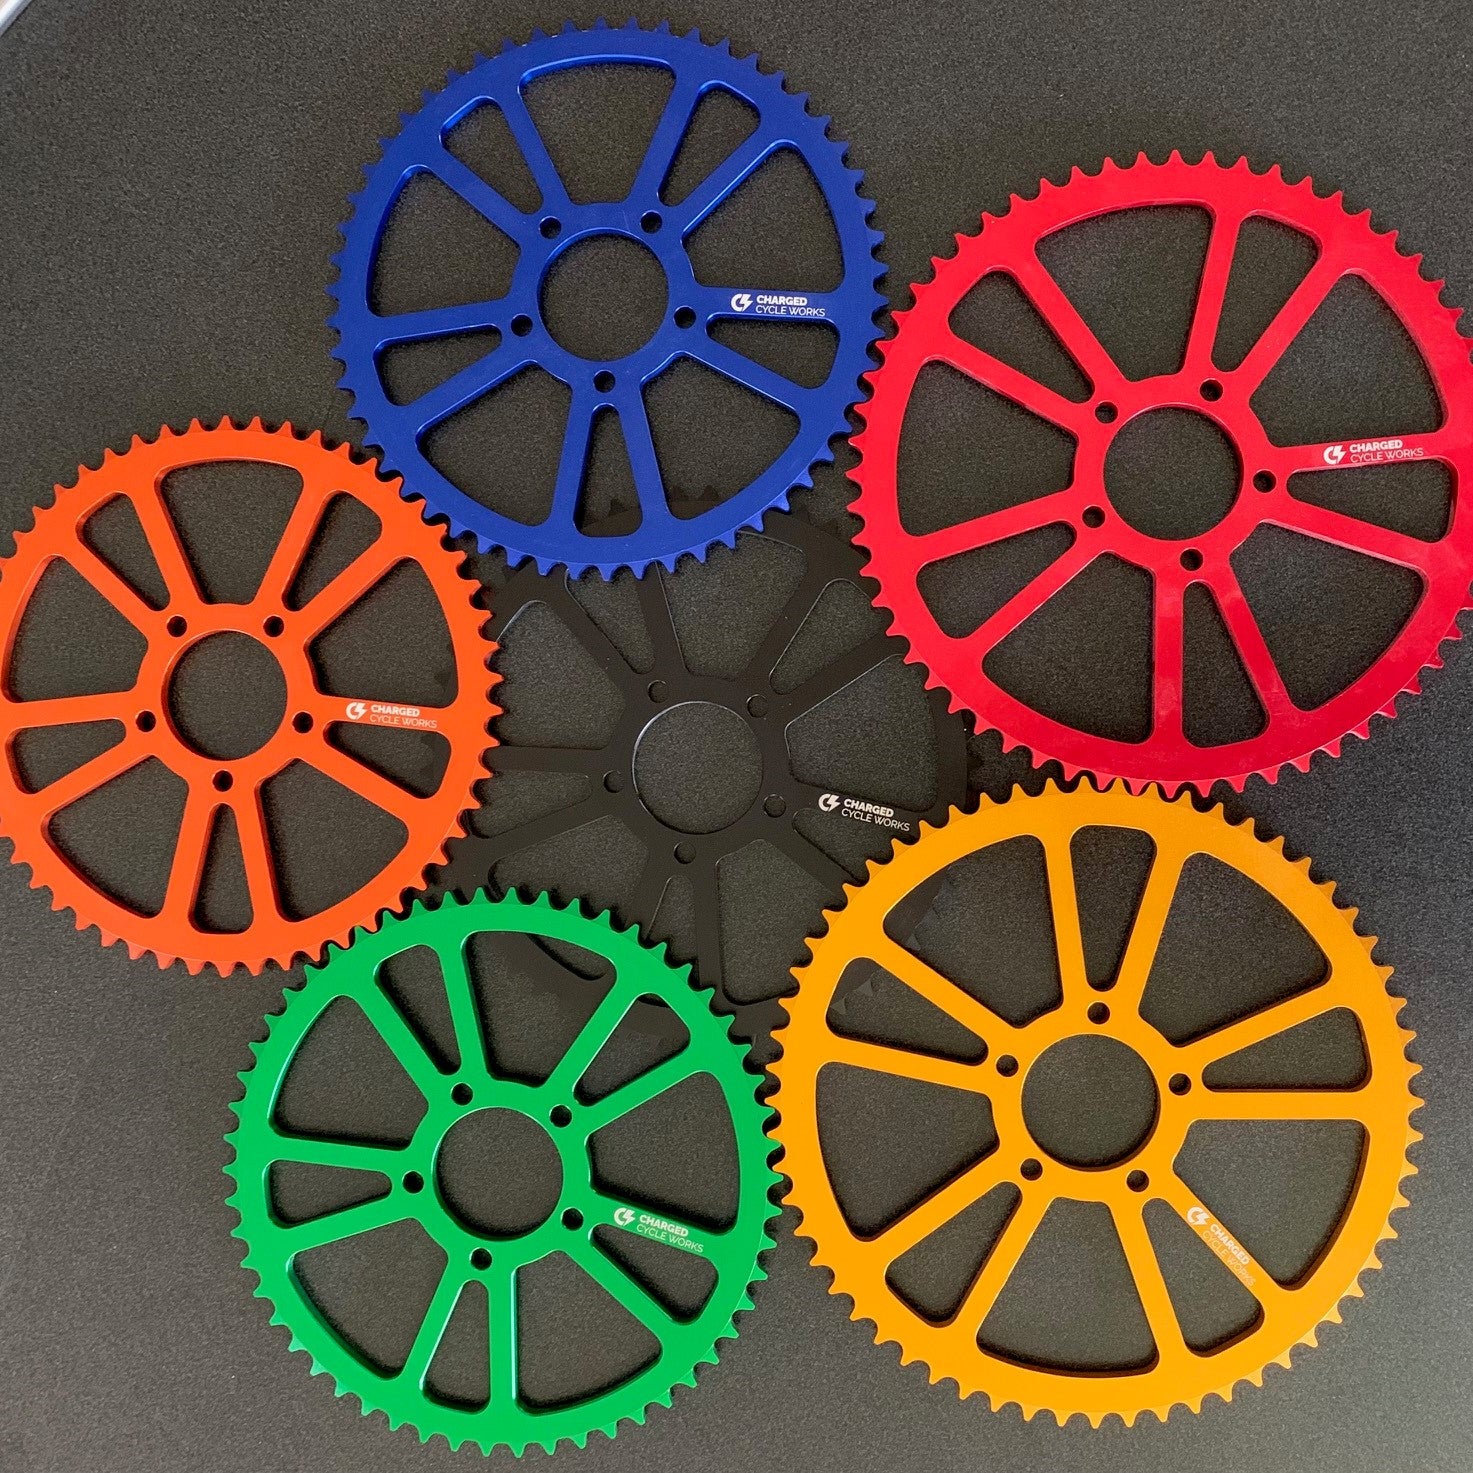 Sprockets by Charged Cycle Works for Surron